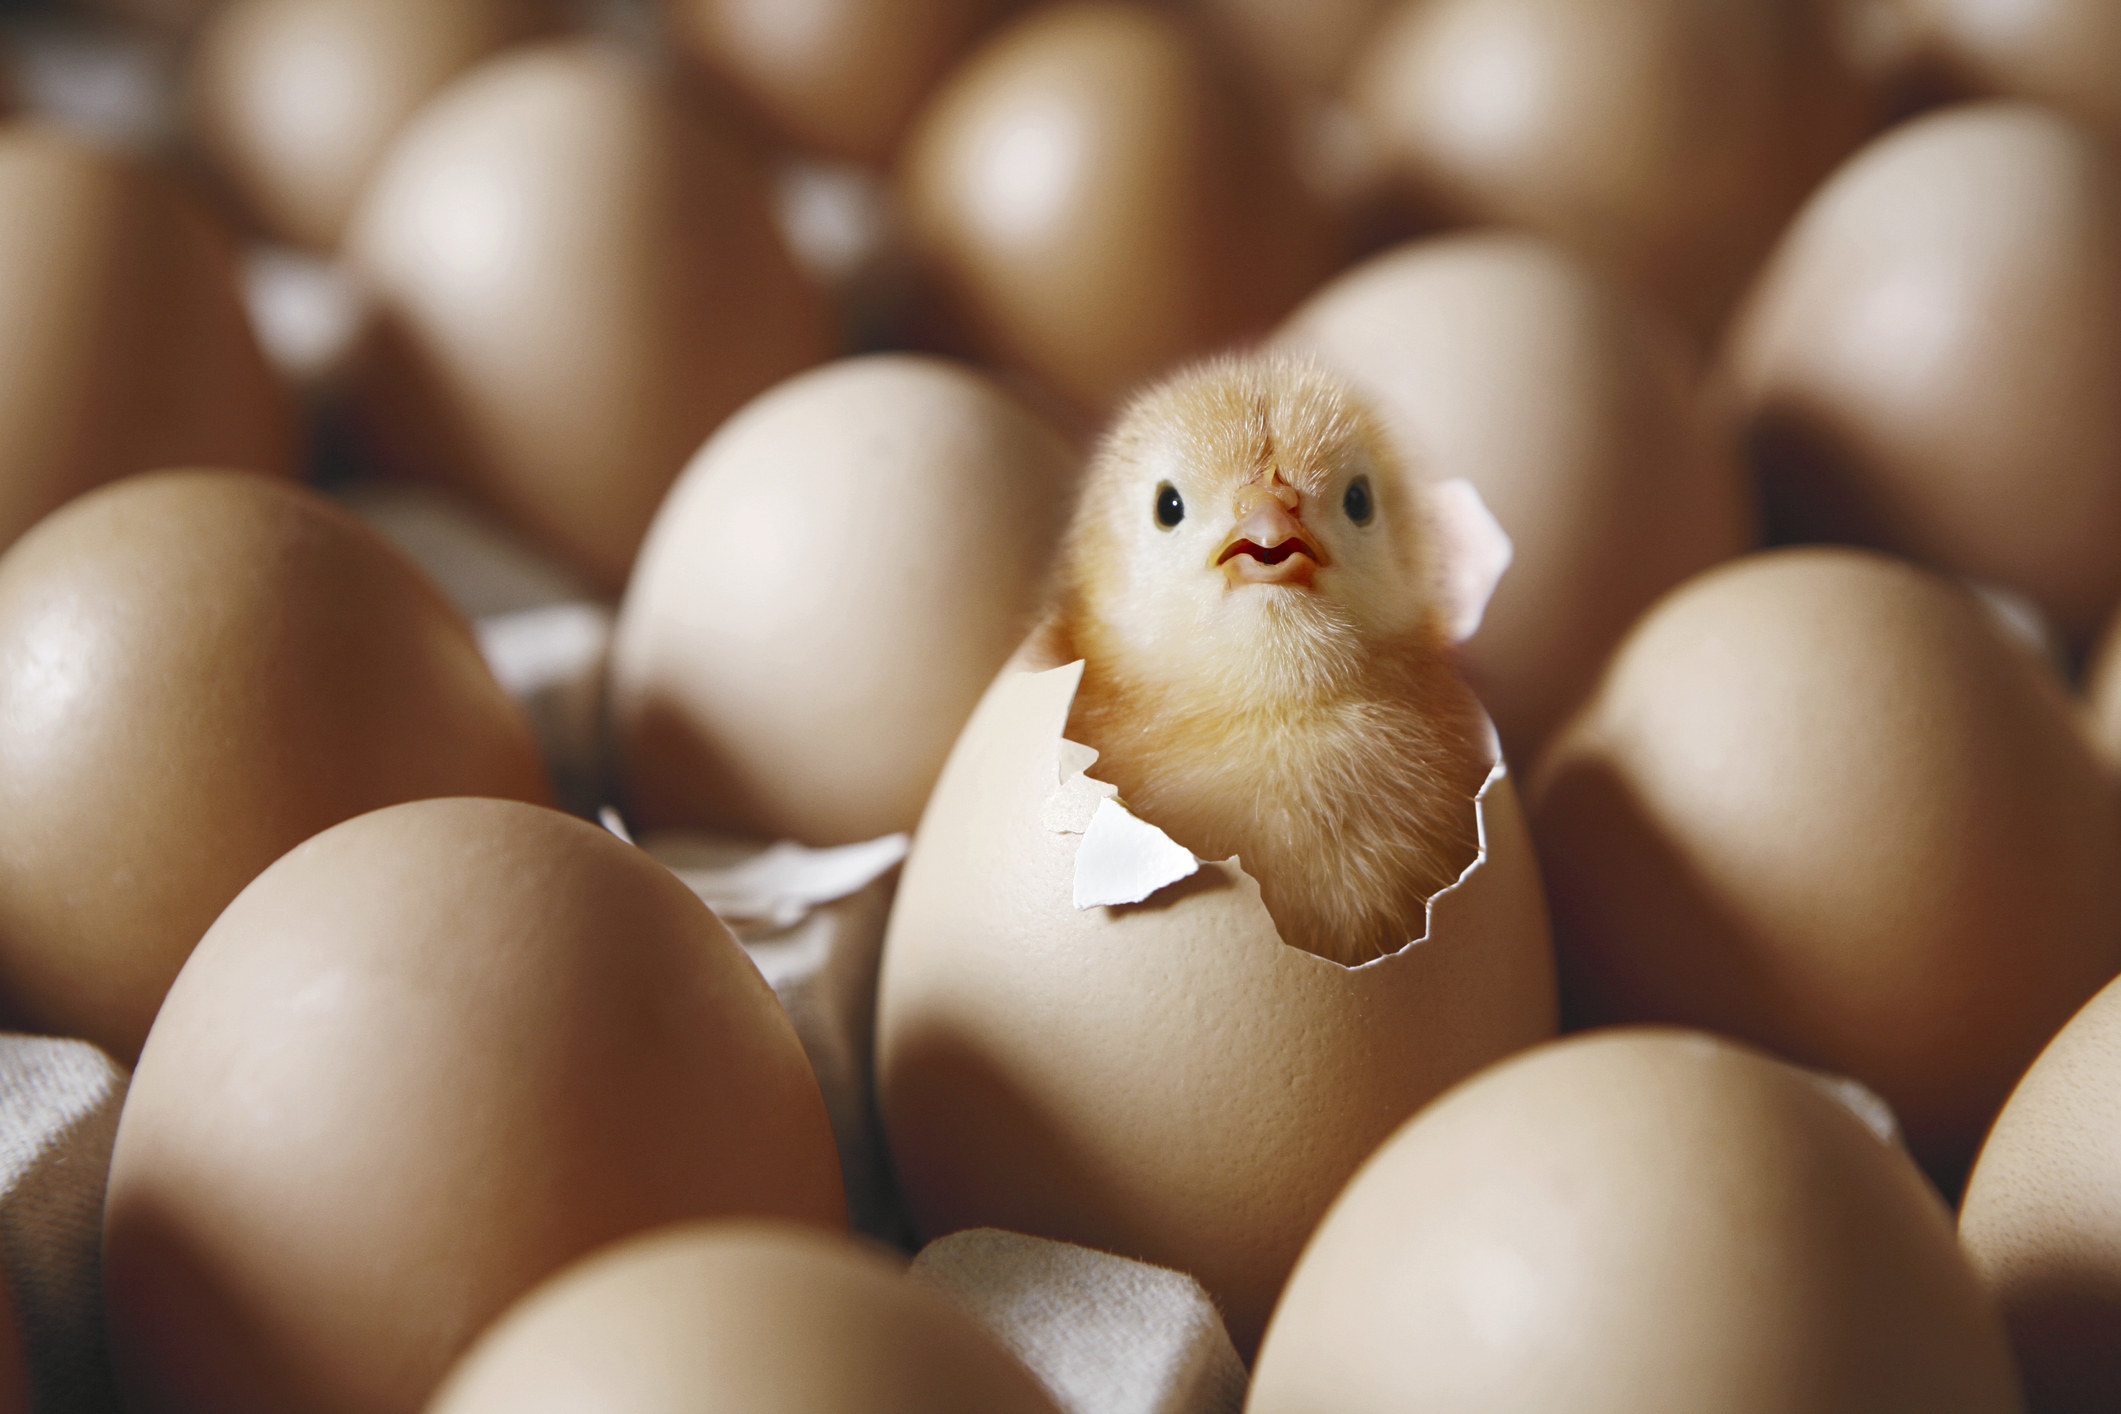 Chick hatching from an egg.